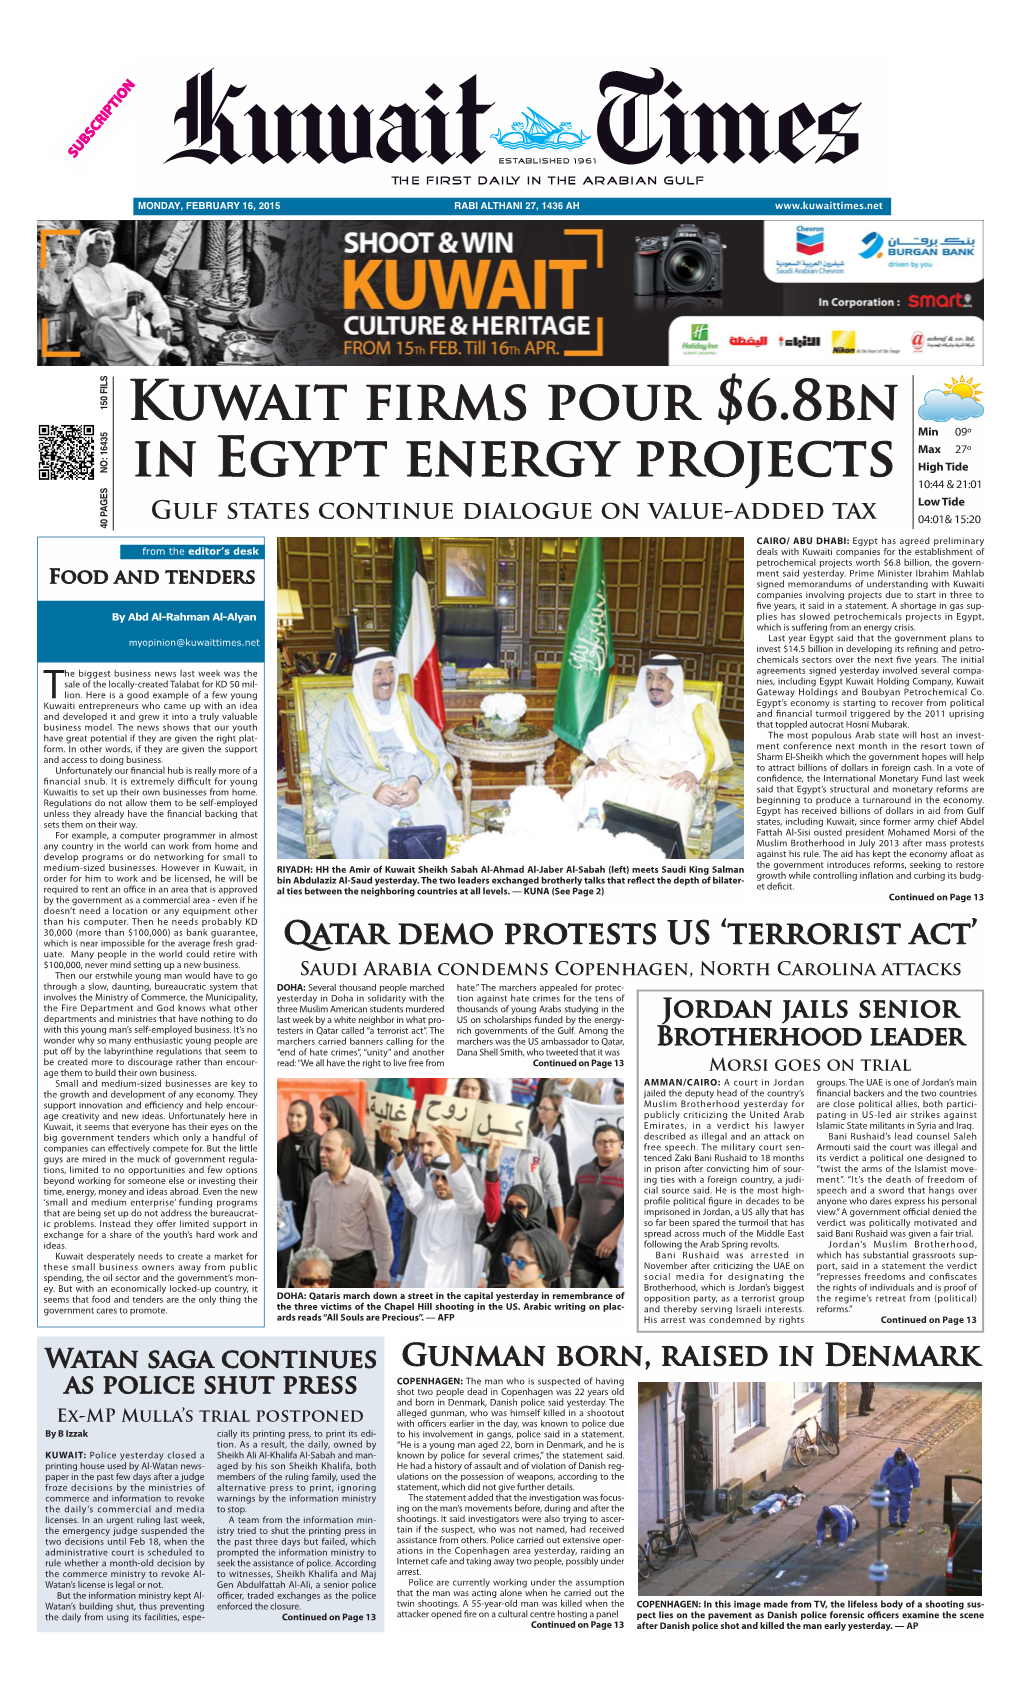 Kuwait Firms Pour $6.8Bn in Egypt Energy Projects